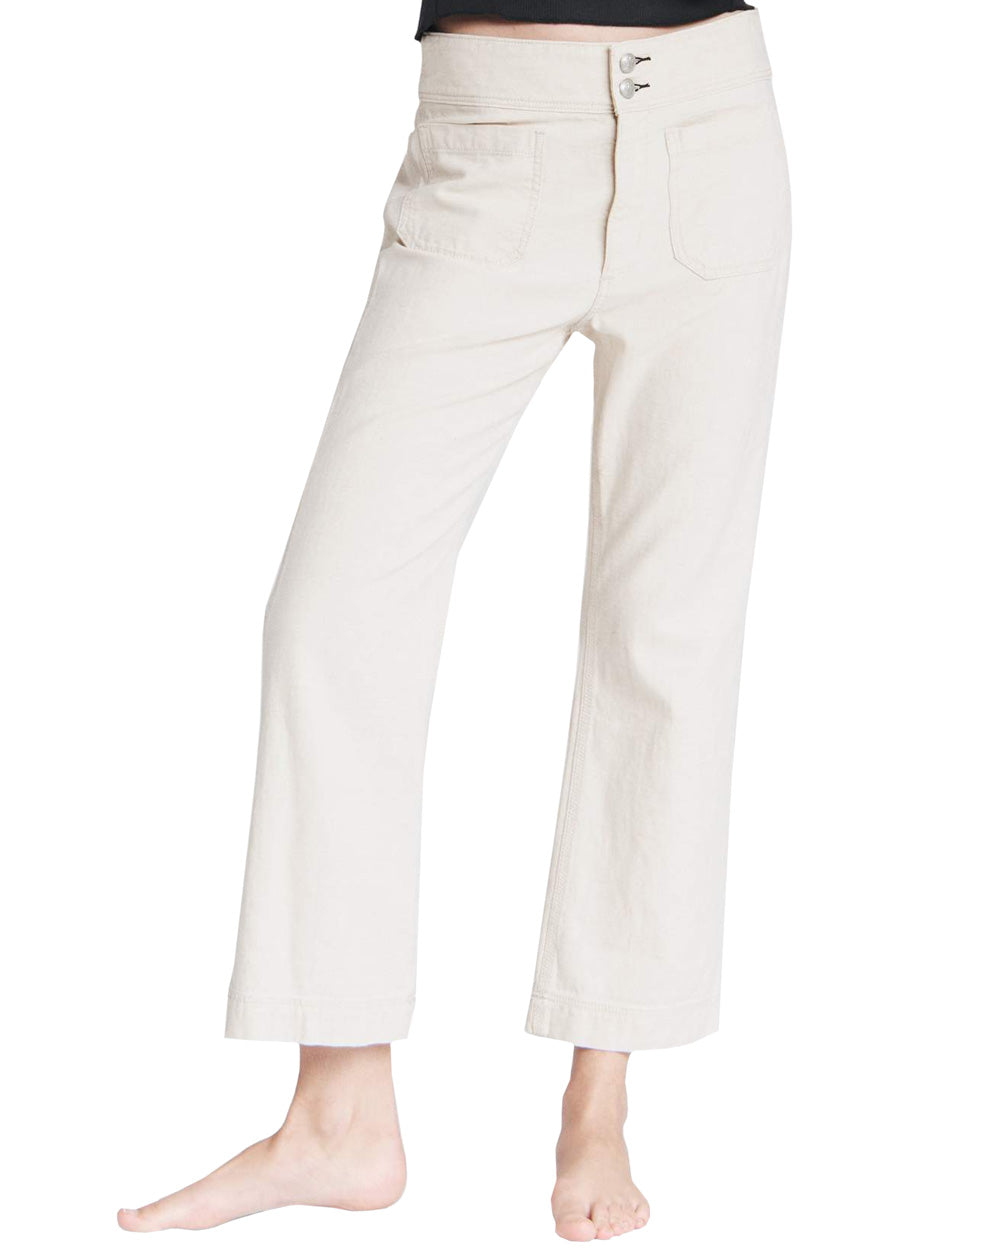 The Naval High Rise Crop Jean in Natural